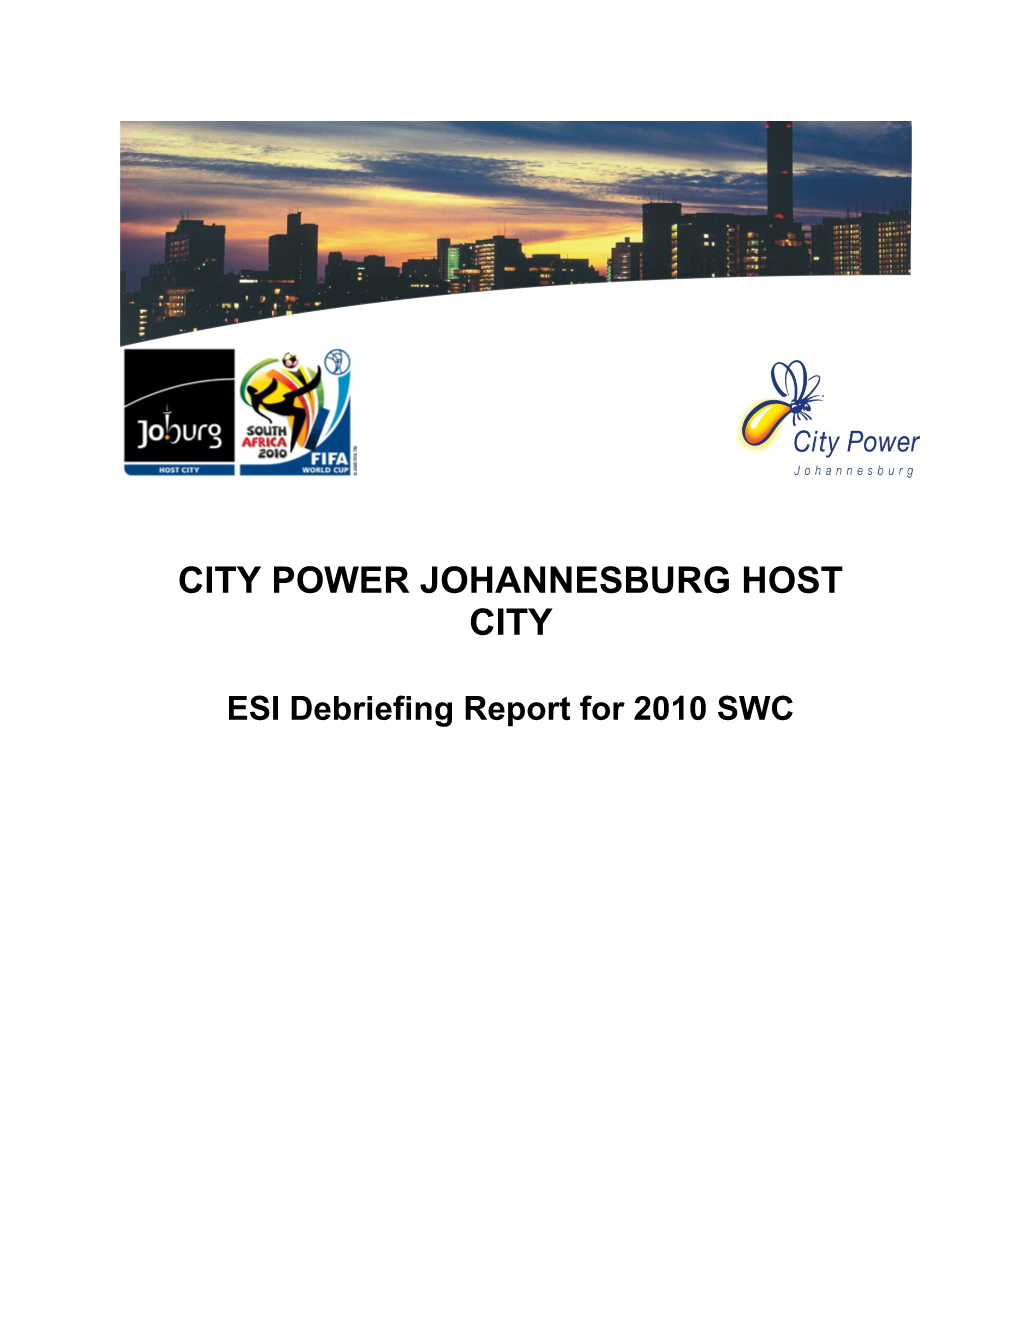 ESI Debriefing Report for 2010 SWC